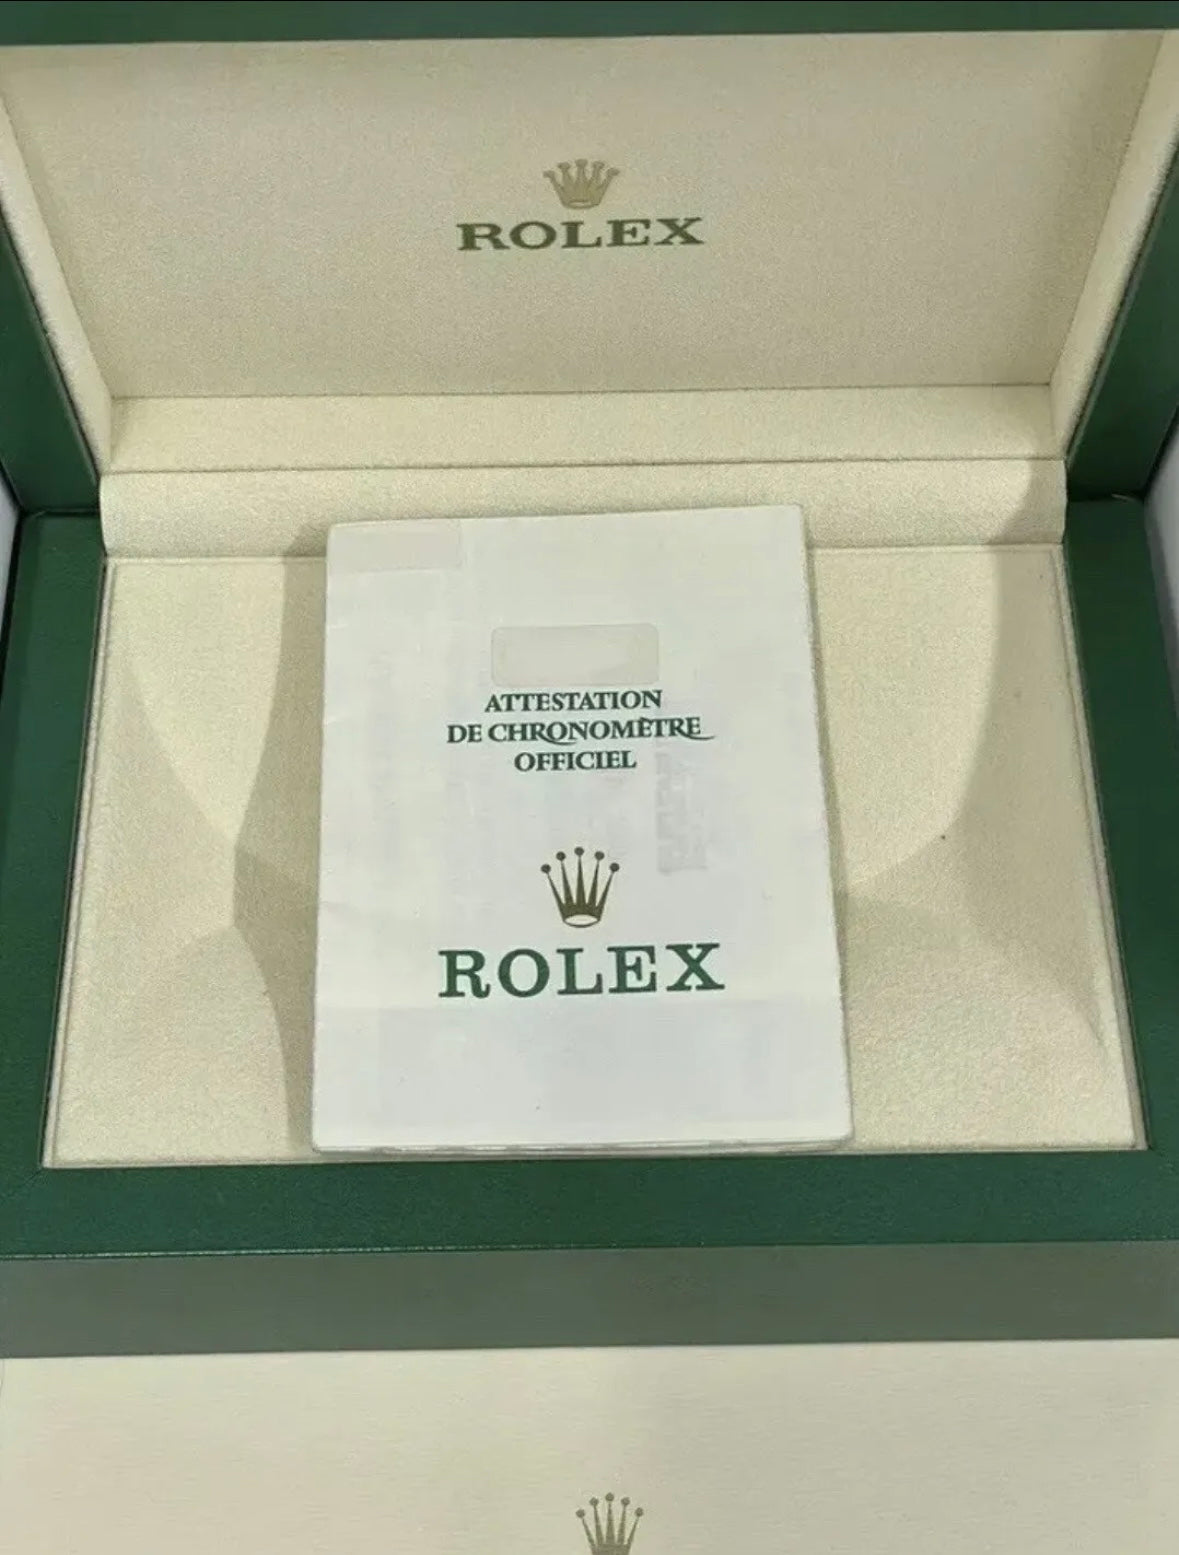 Ladies Rolex Datejust 26 Factory Champagne Roman Dial ‘69173’ - Ride On Timee